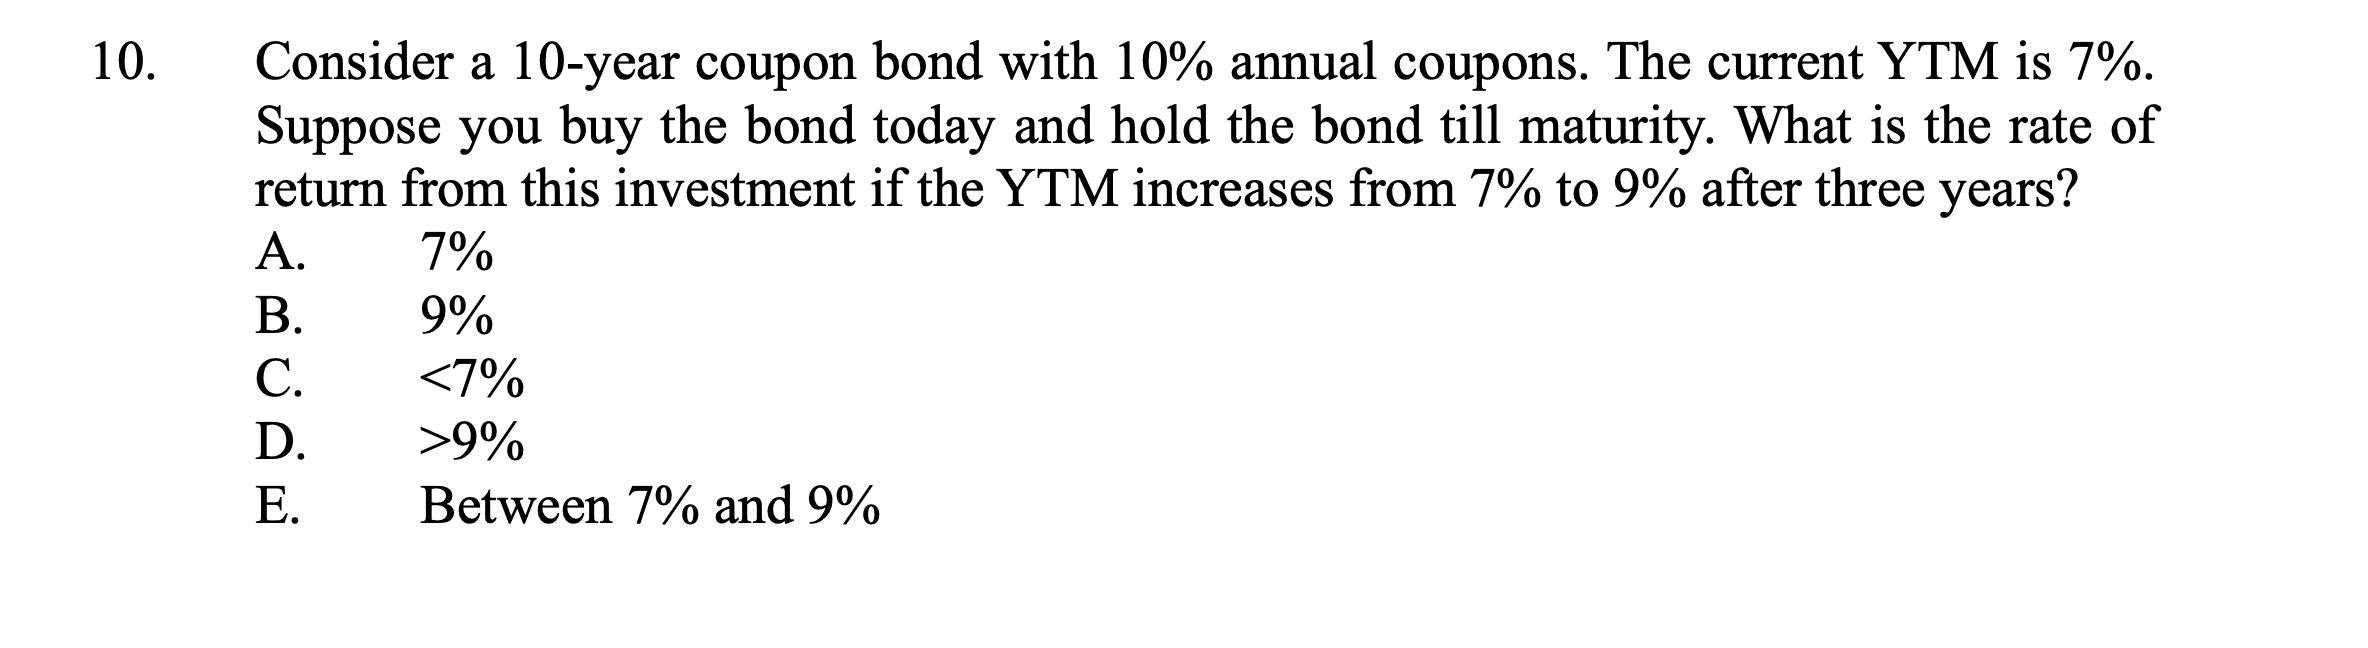 10 .Consider a 10-year coupon bond with 10% annual coupons. The current YTM is 7%. Suppose you buy the bond today and hold t